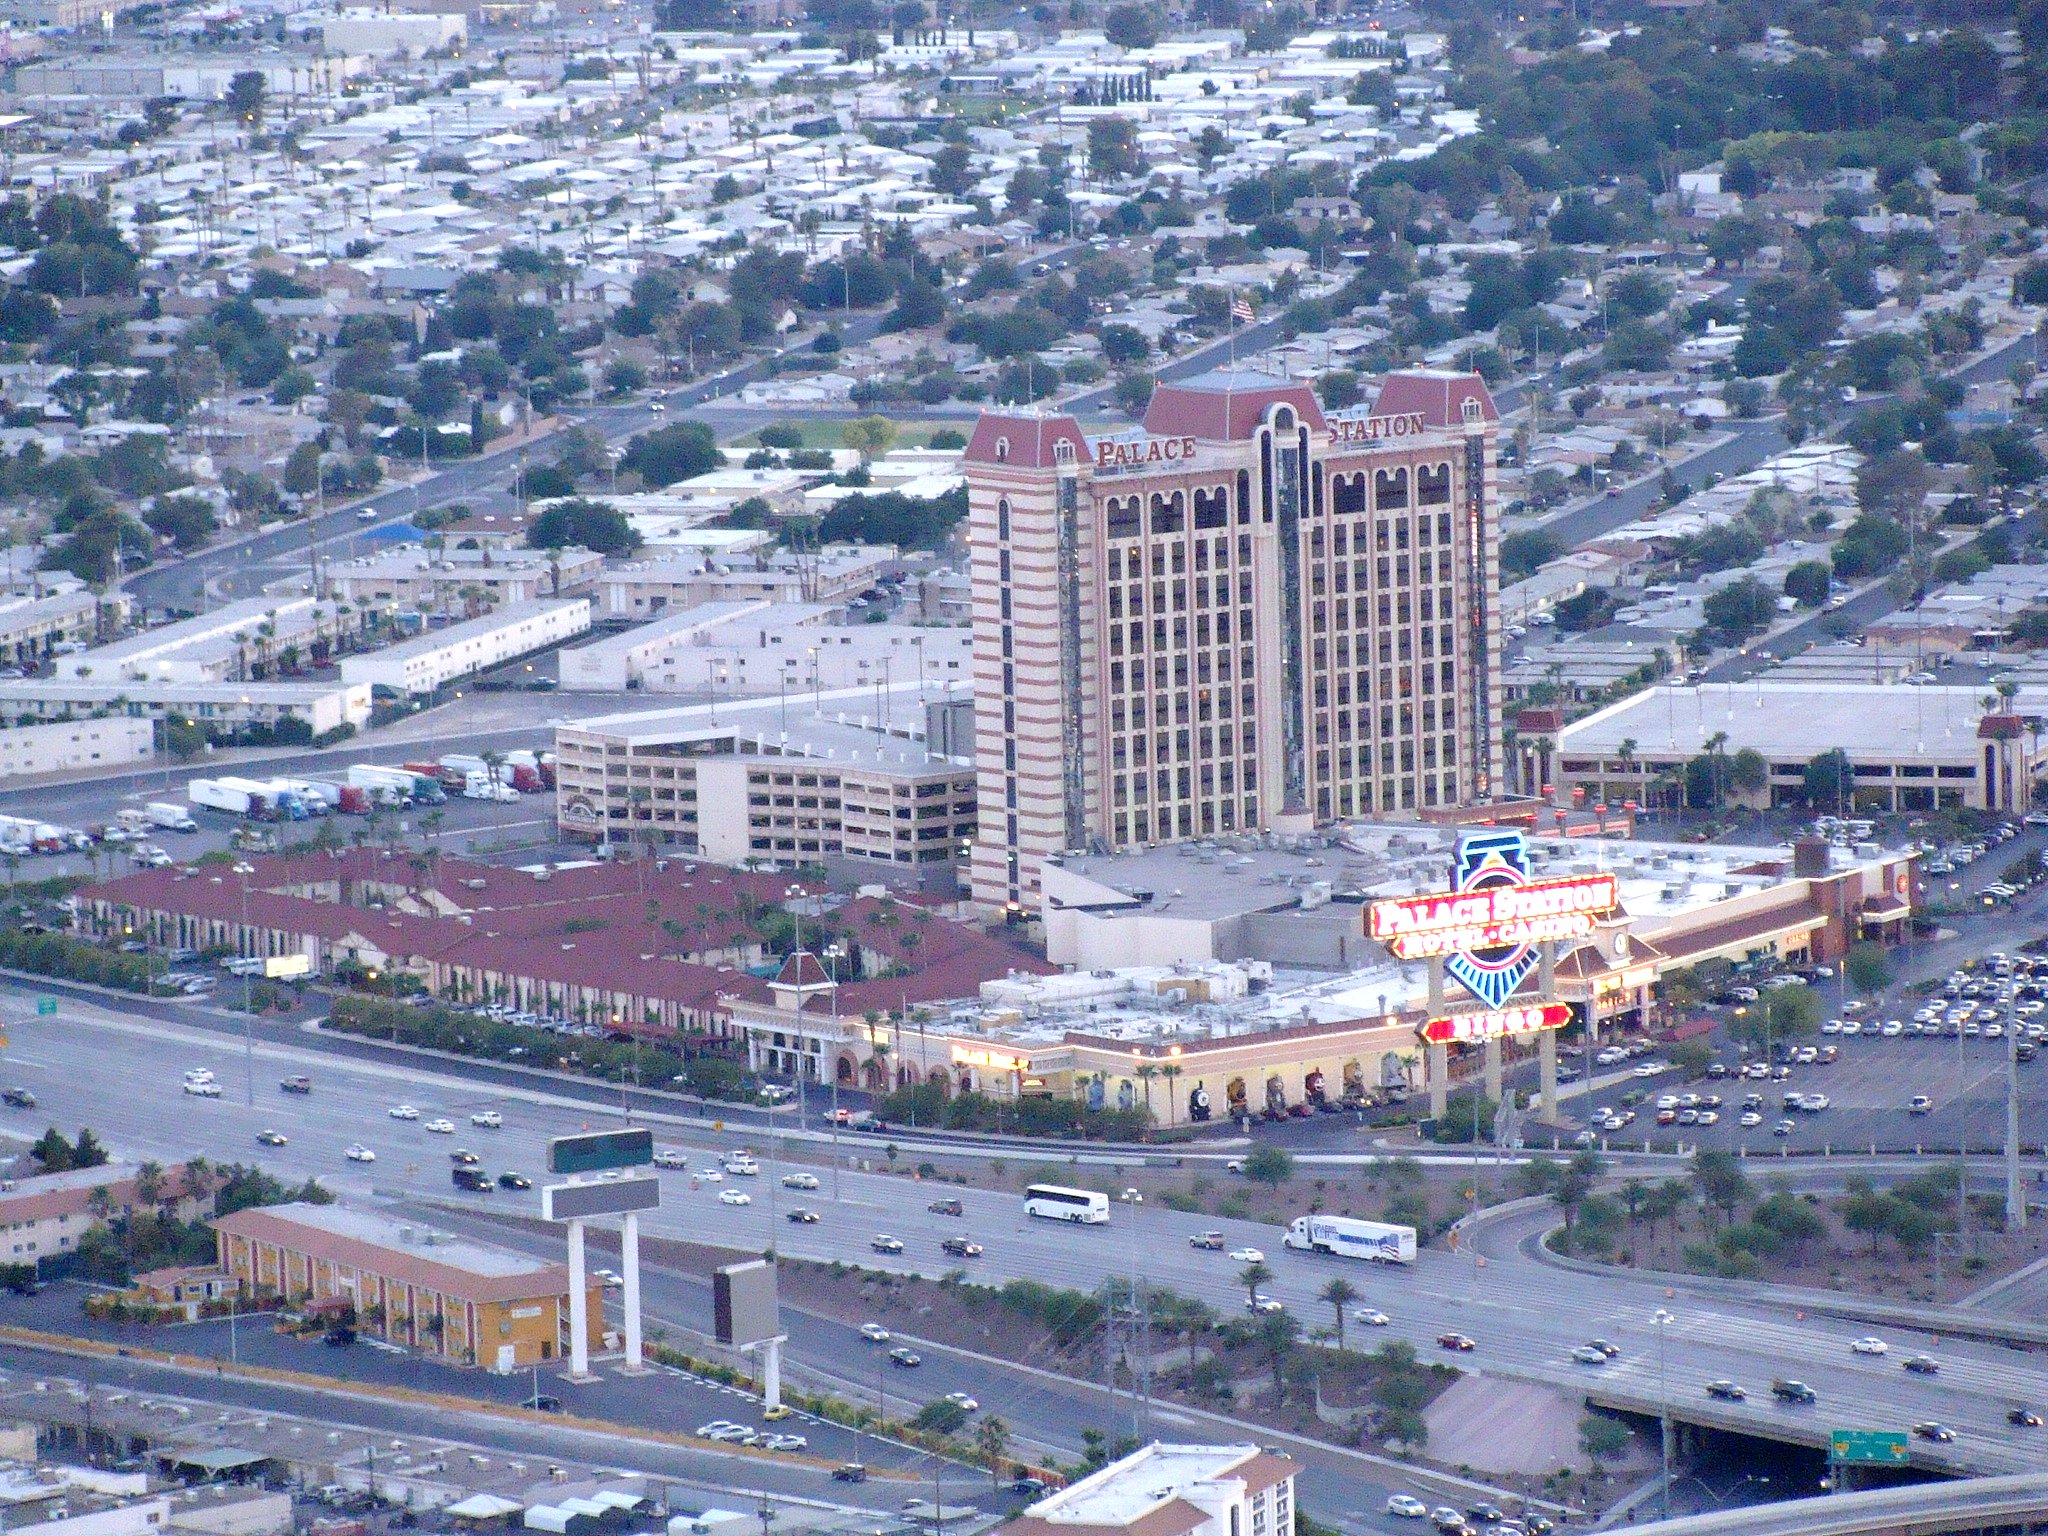 Palace Station Hotel and Casino in Las Vegas